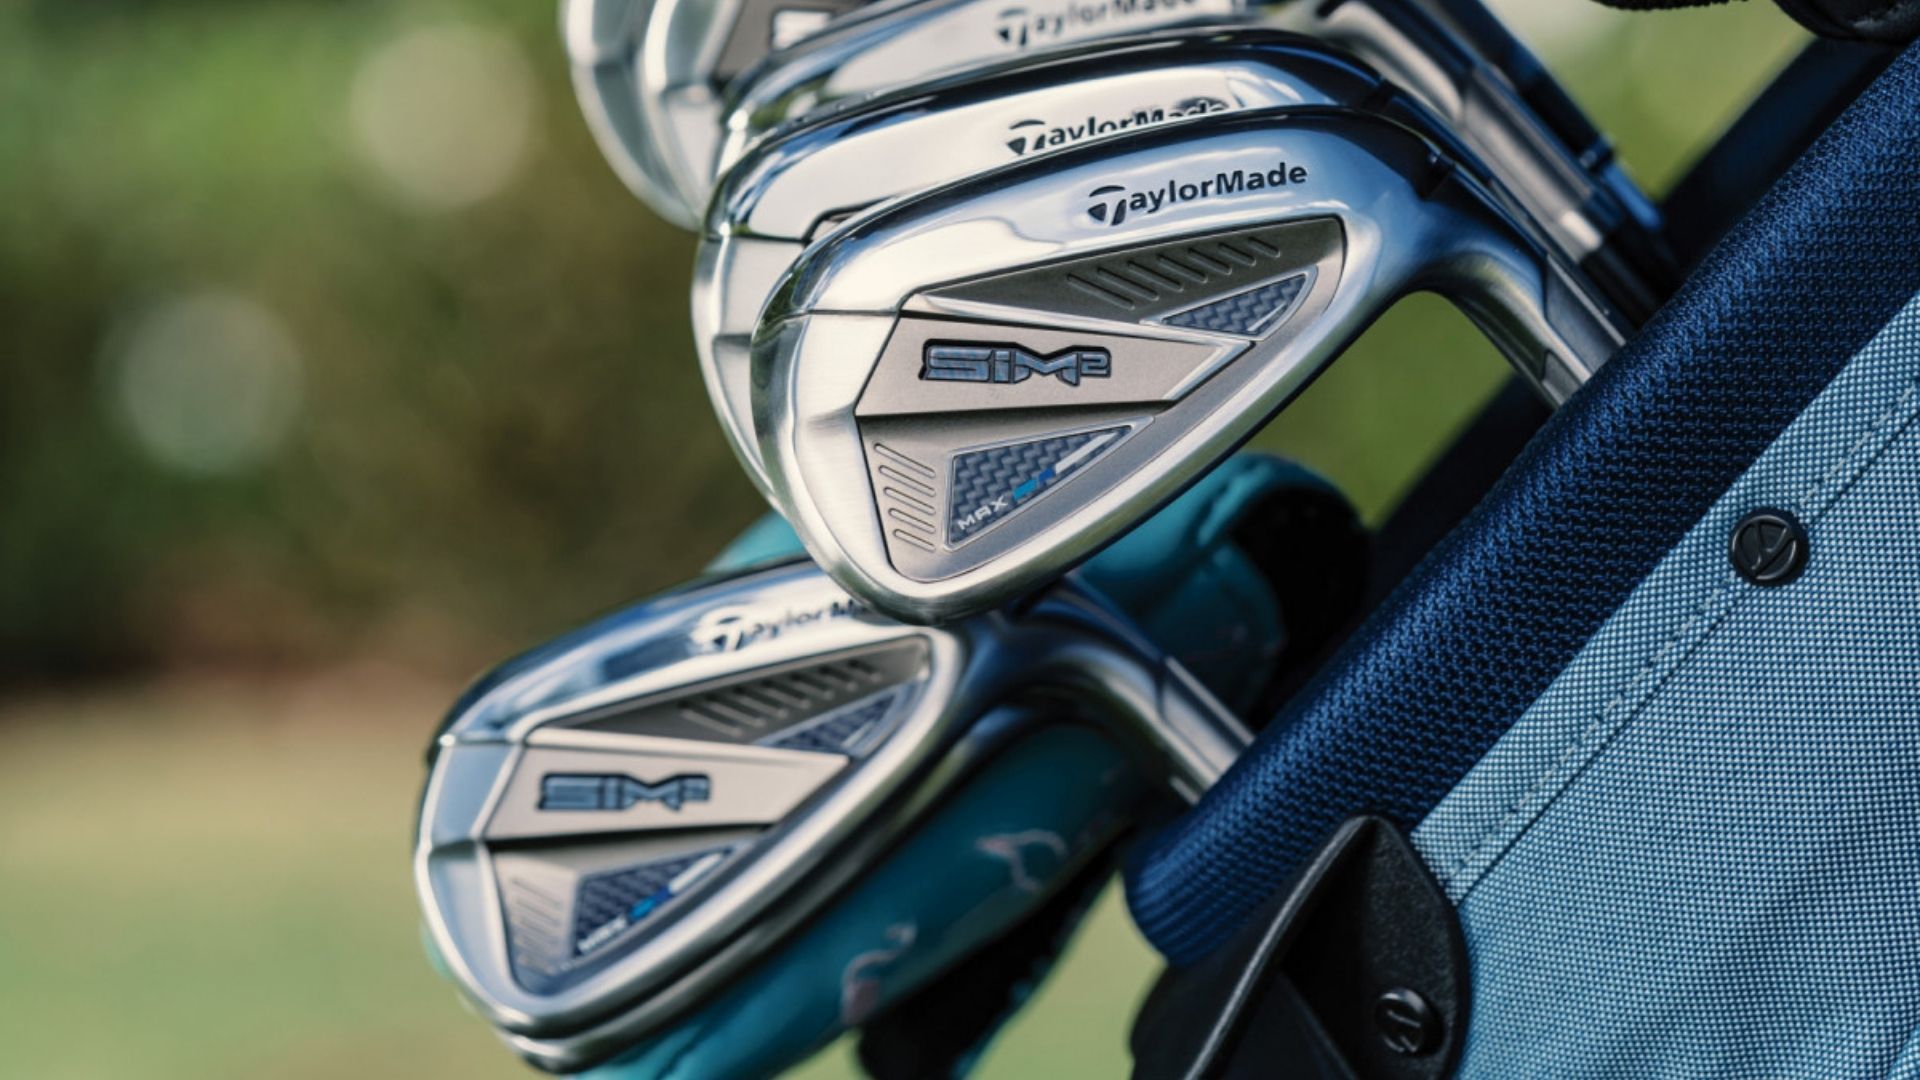 5 of the Very Best GameImprovement Irons for 2021